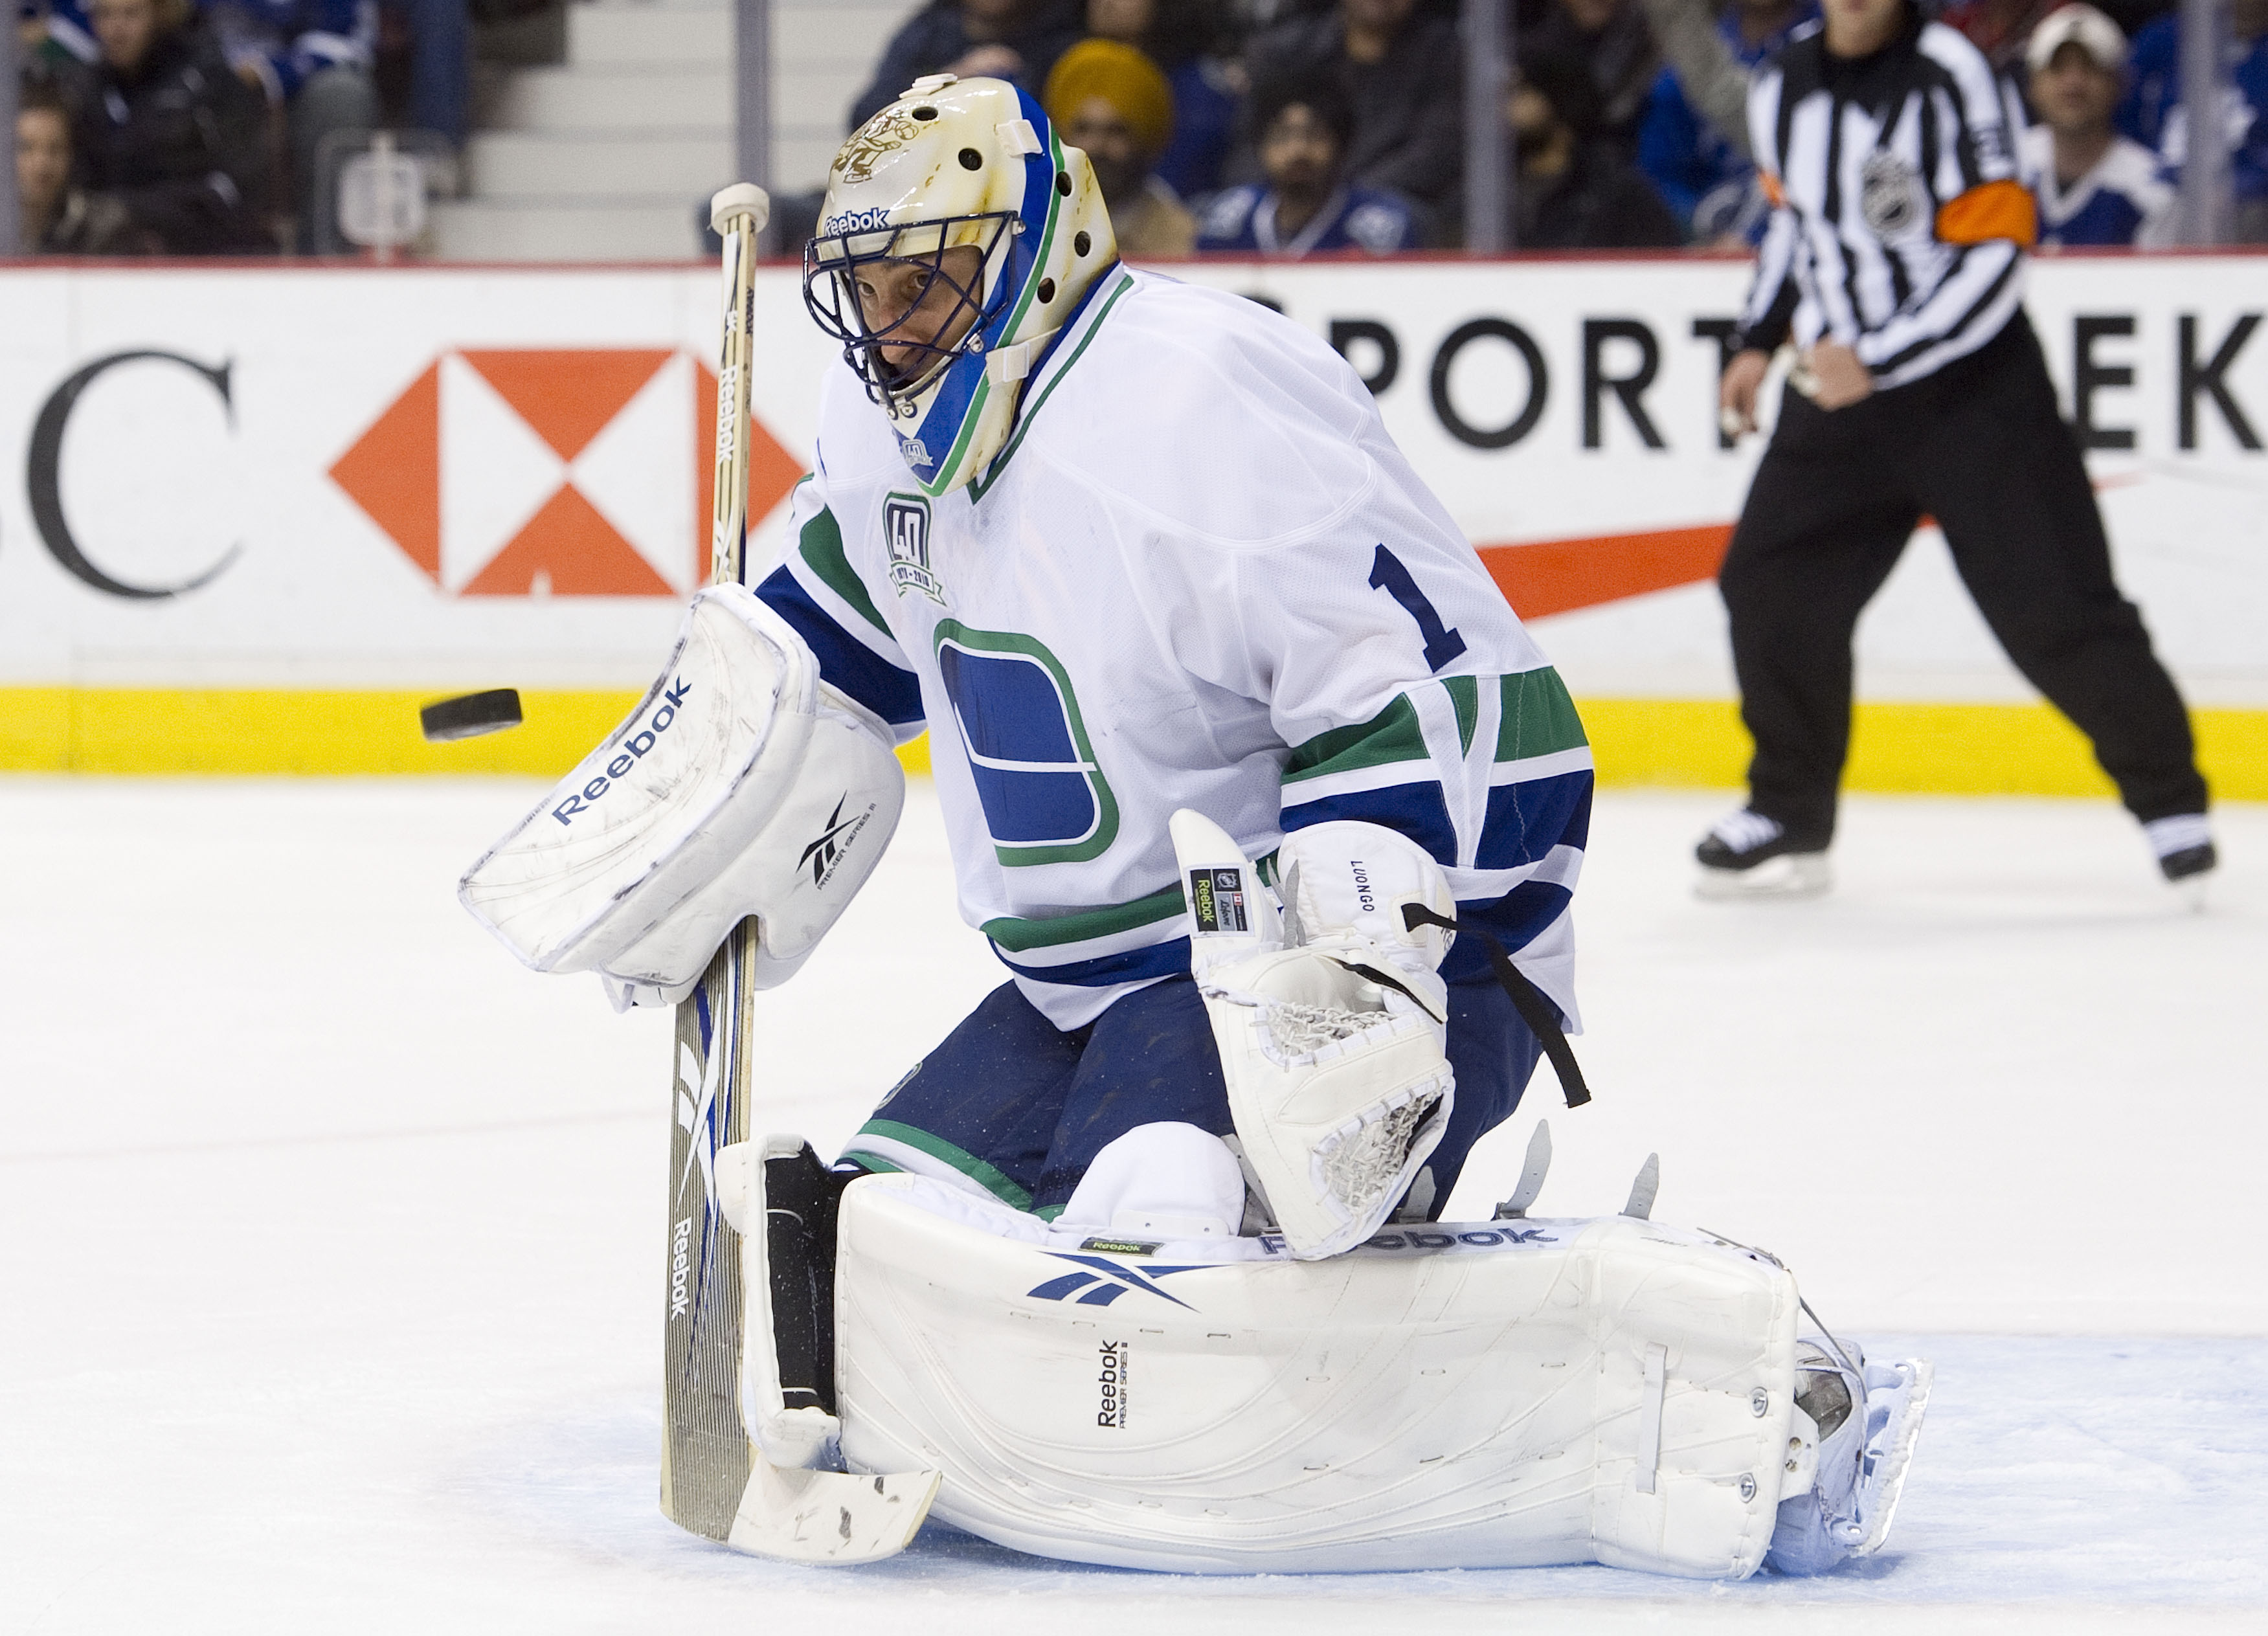 VANCOUVER, CANADA - DECEMBER 18: Goalie Roberto Luongo #1 of the Vancouver Canucks keeps an eye on the airborne puck after making a save against the Toronto Maple Leafs during the first period in NHL action on December 18, 2010 at Rogers Arena in Vancouve